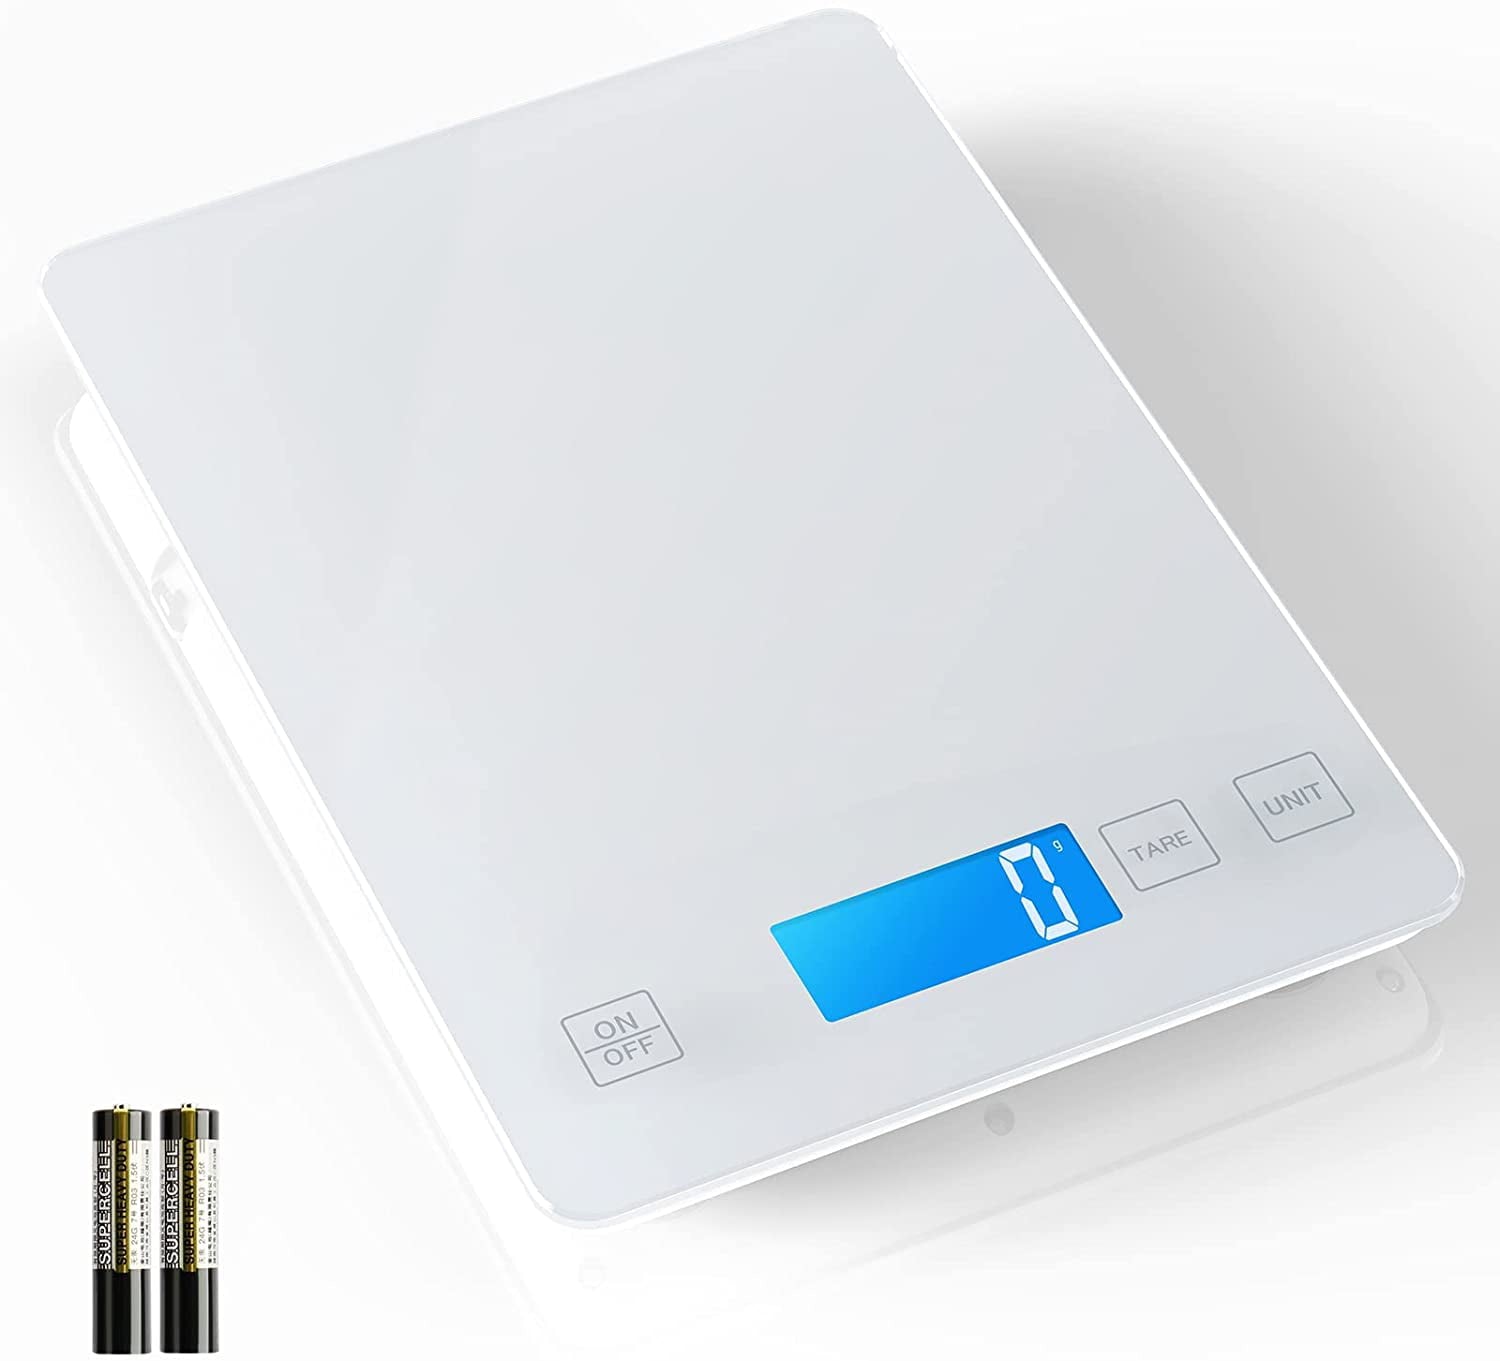 Food Scale, 22lb Digital Kitchen Stainless Steel Scale Weight